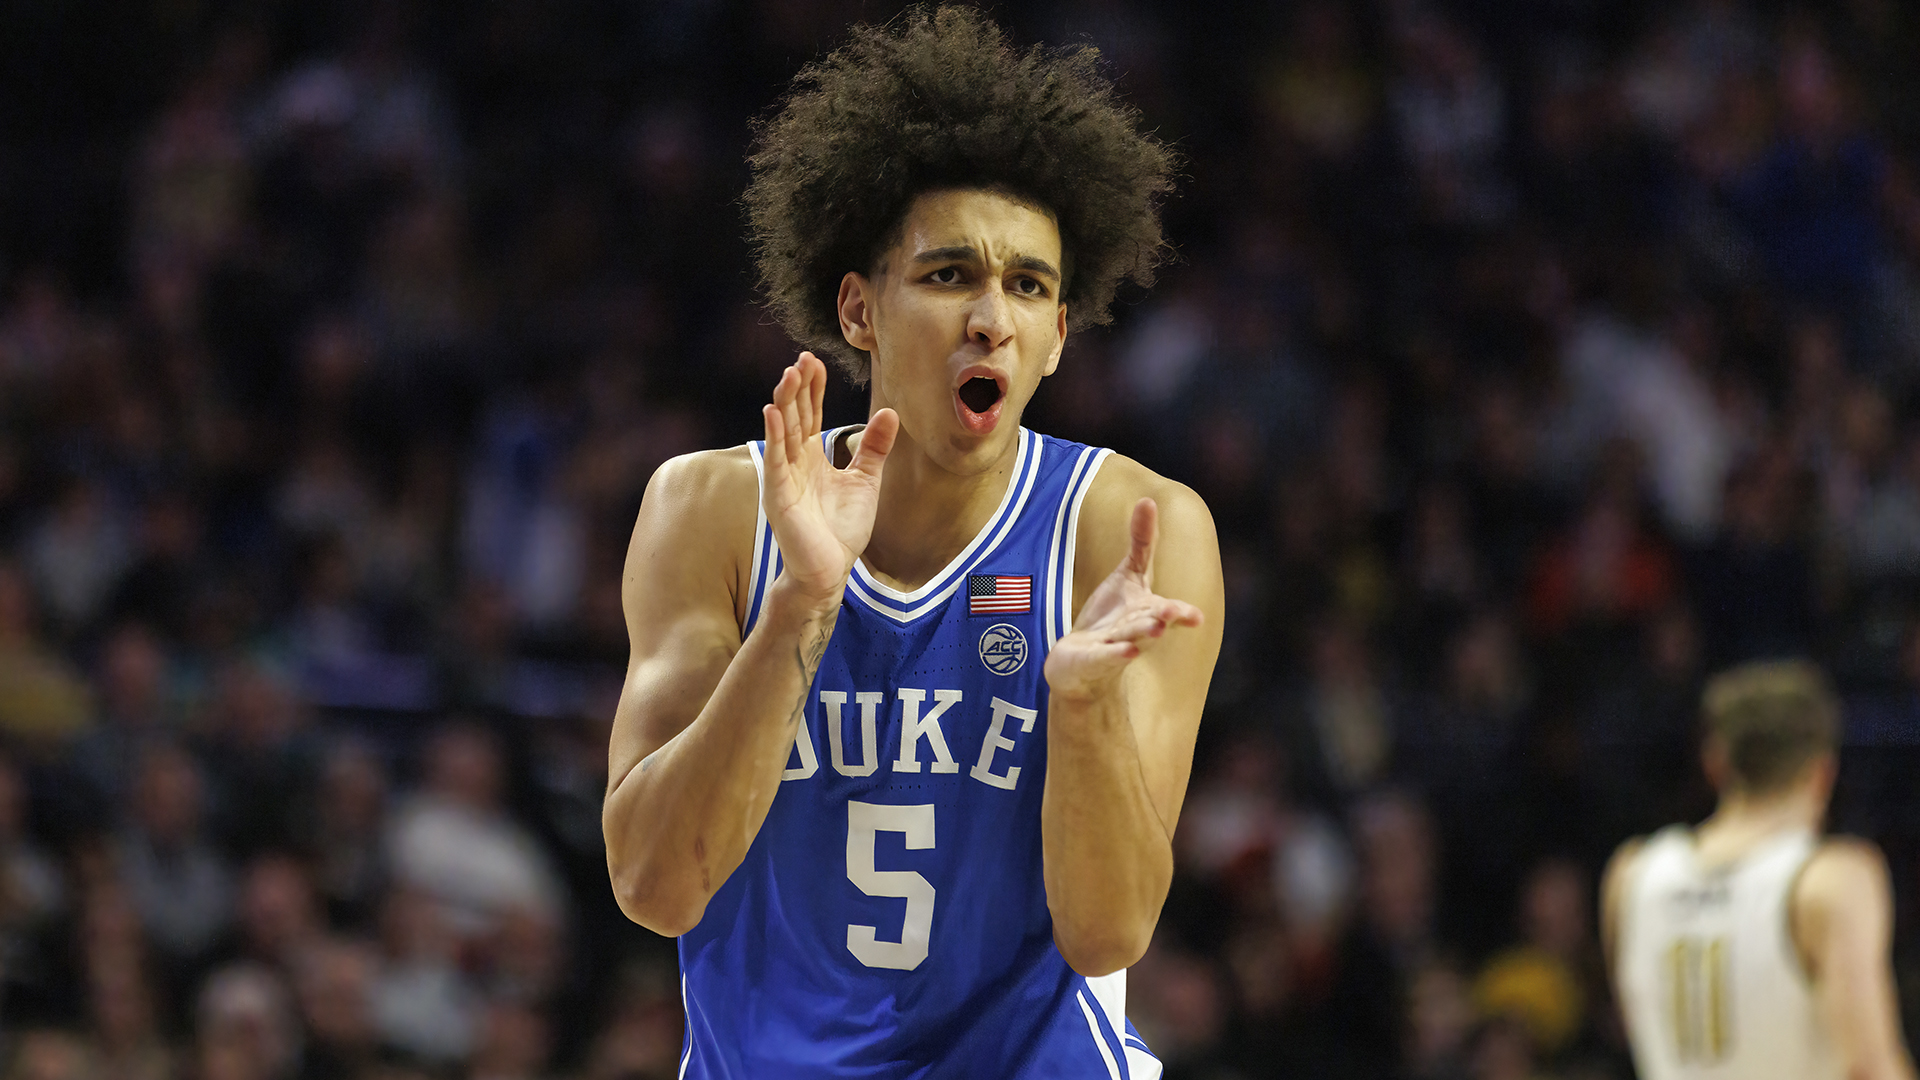 Can Tyrese Proctor’s Much Awaited Return Propel Duke Back in Top Form?